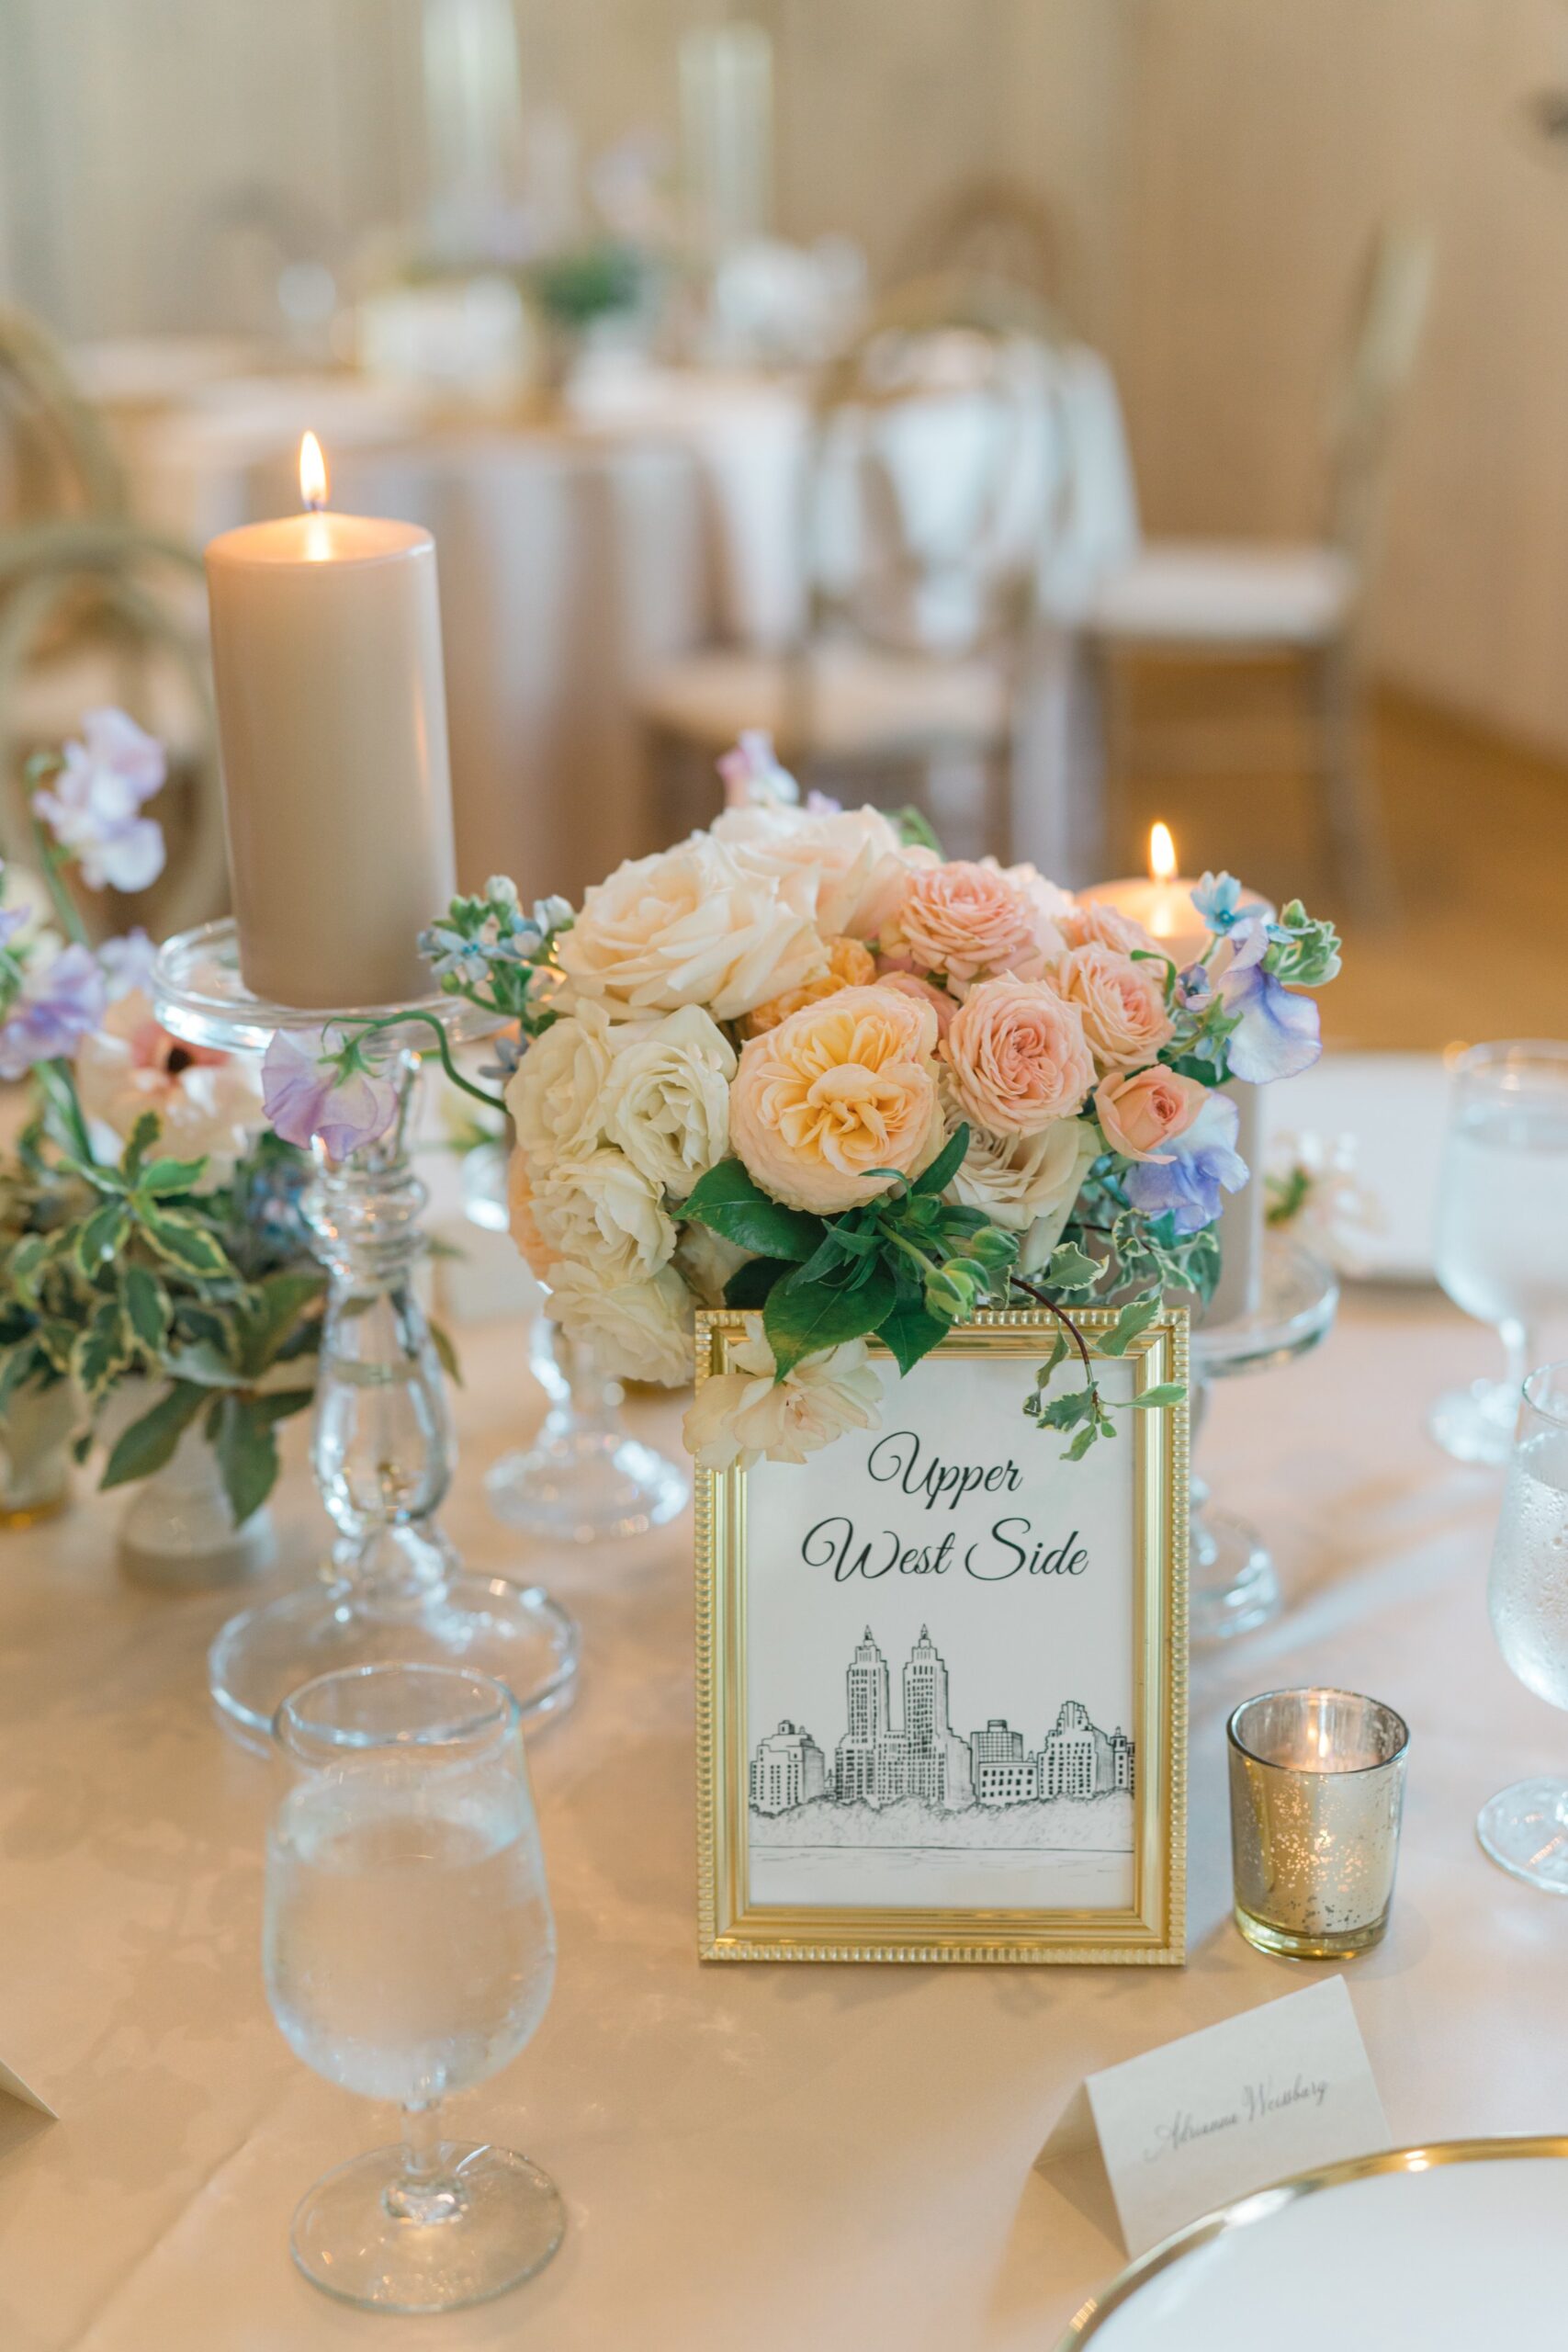 NYC themed table names at Middleton place wedding reception.